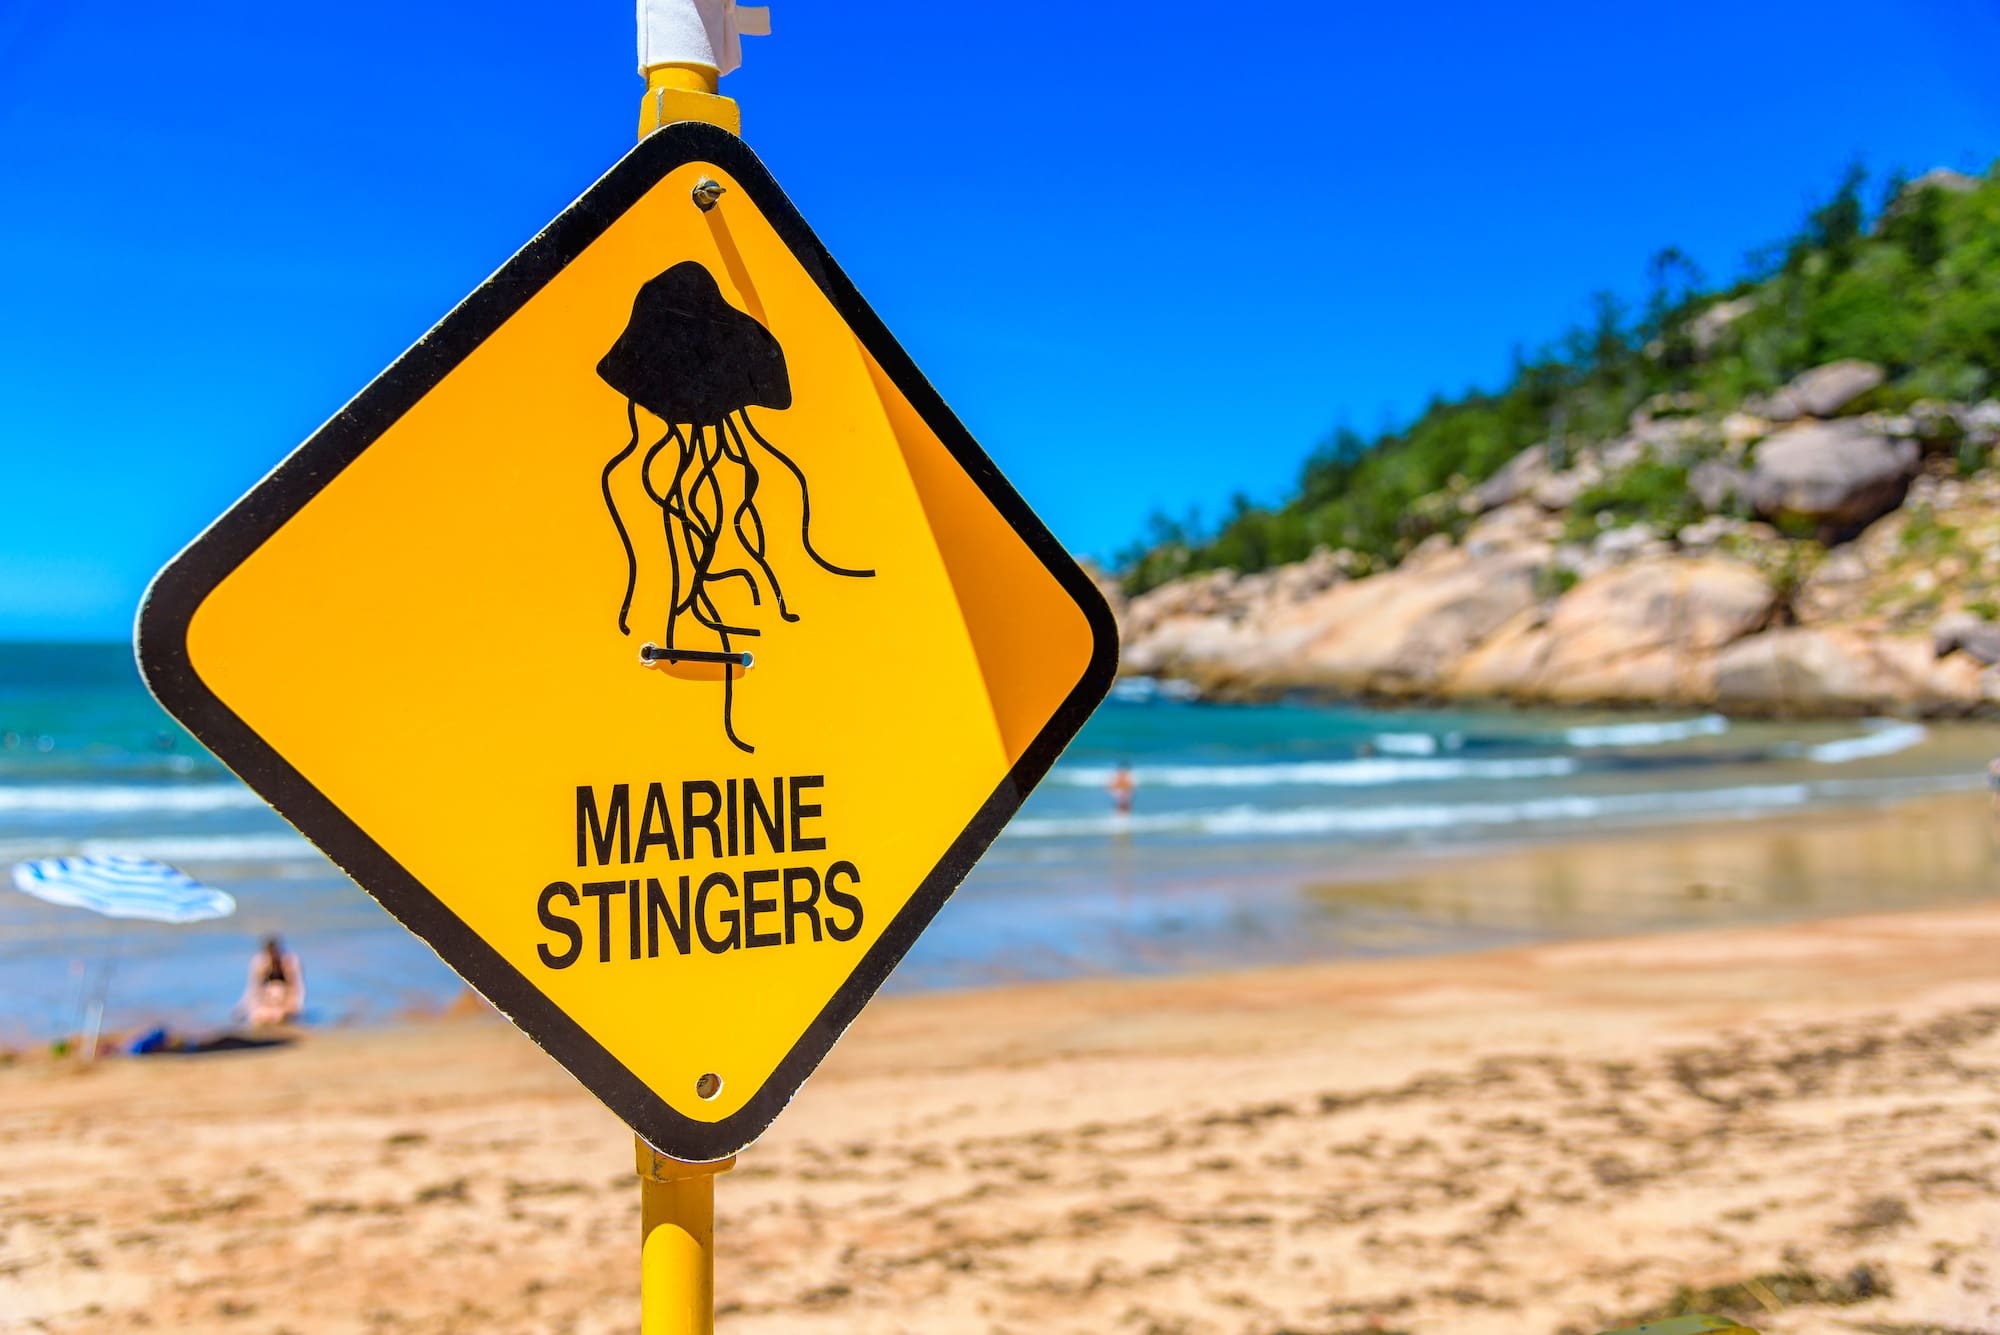 First aid for marine bites and stings